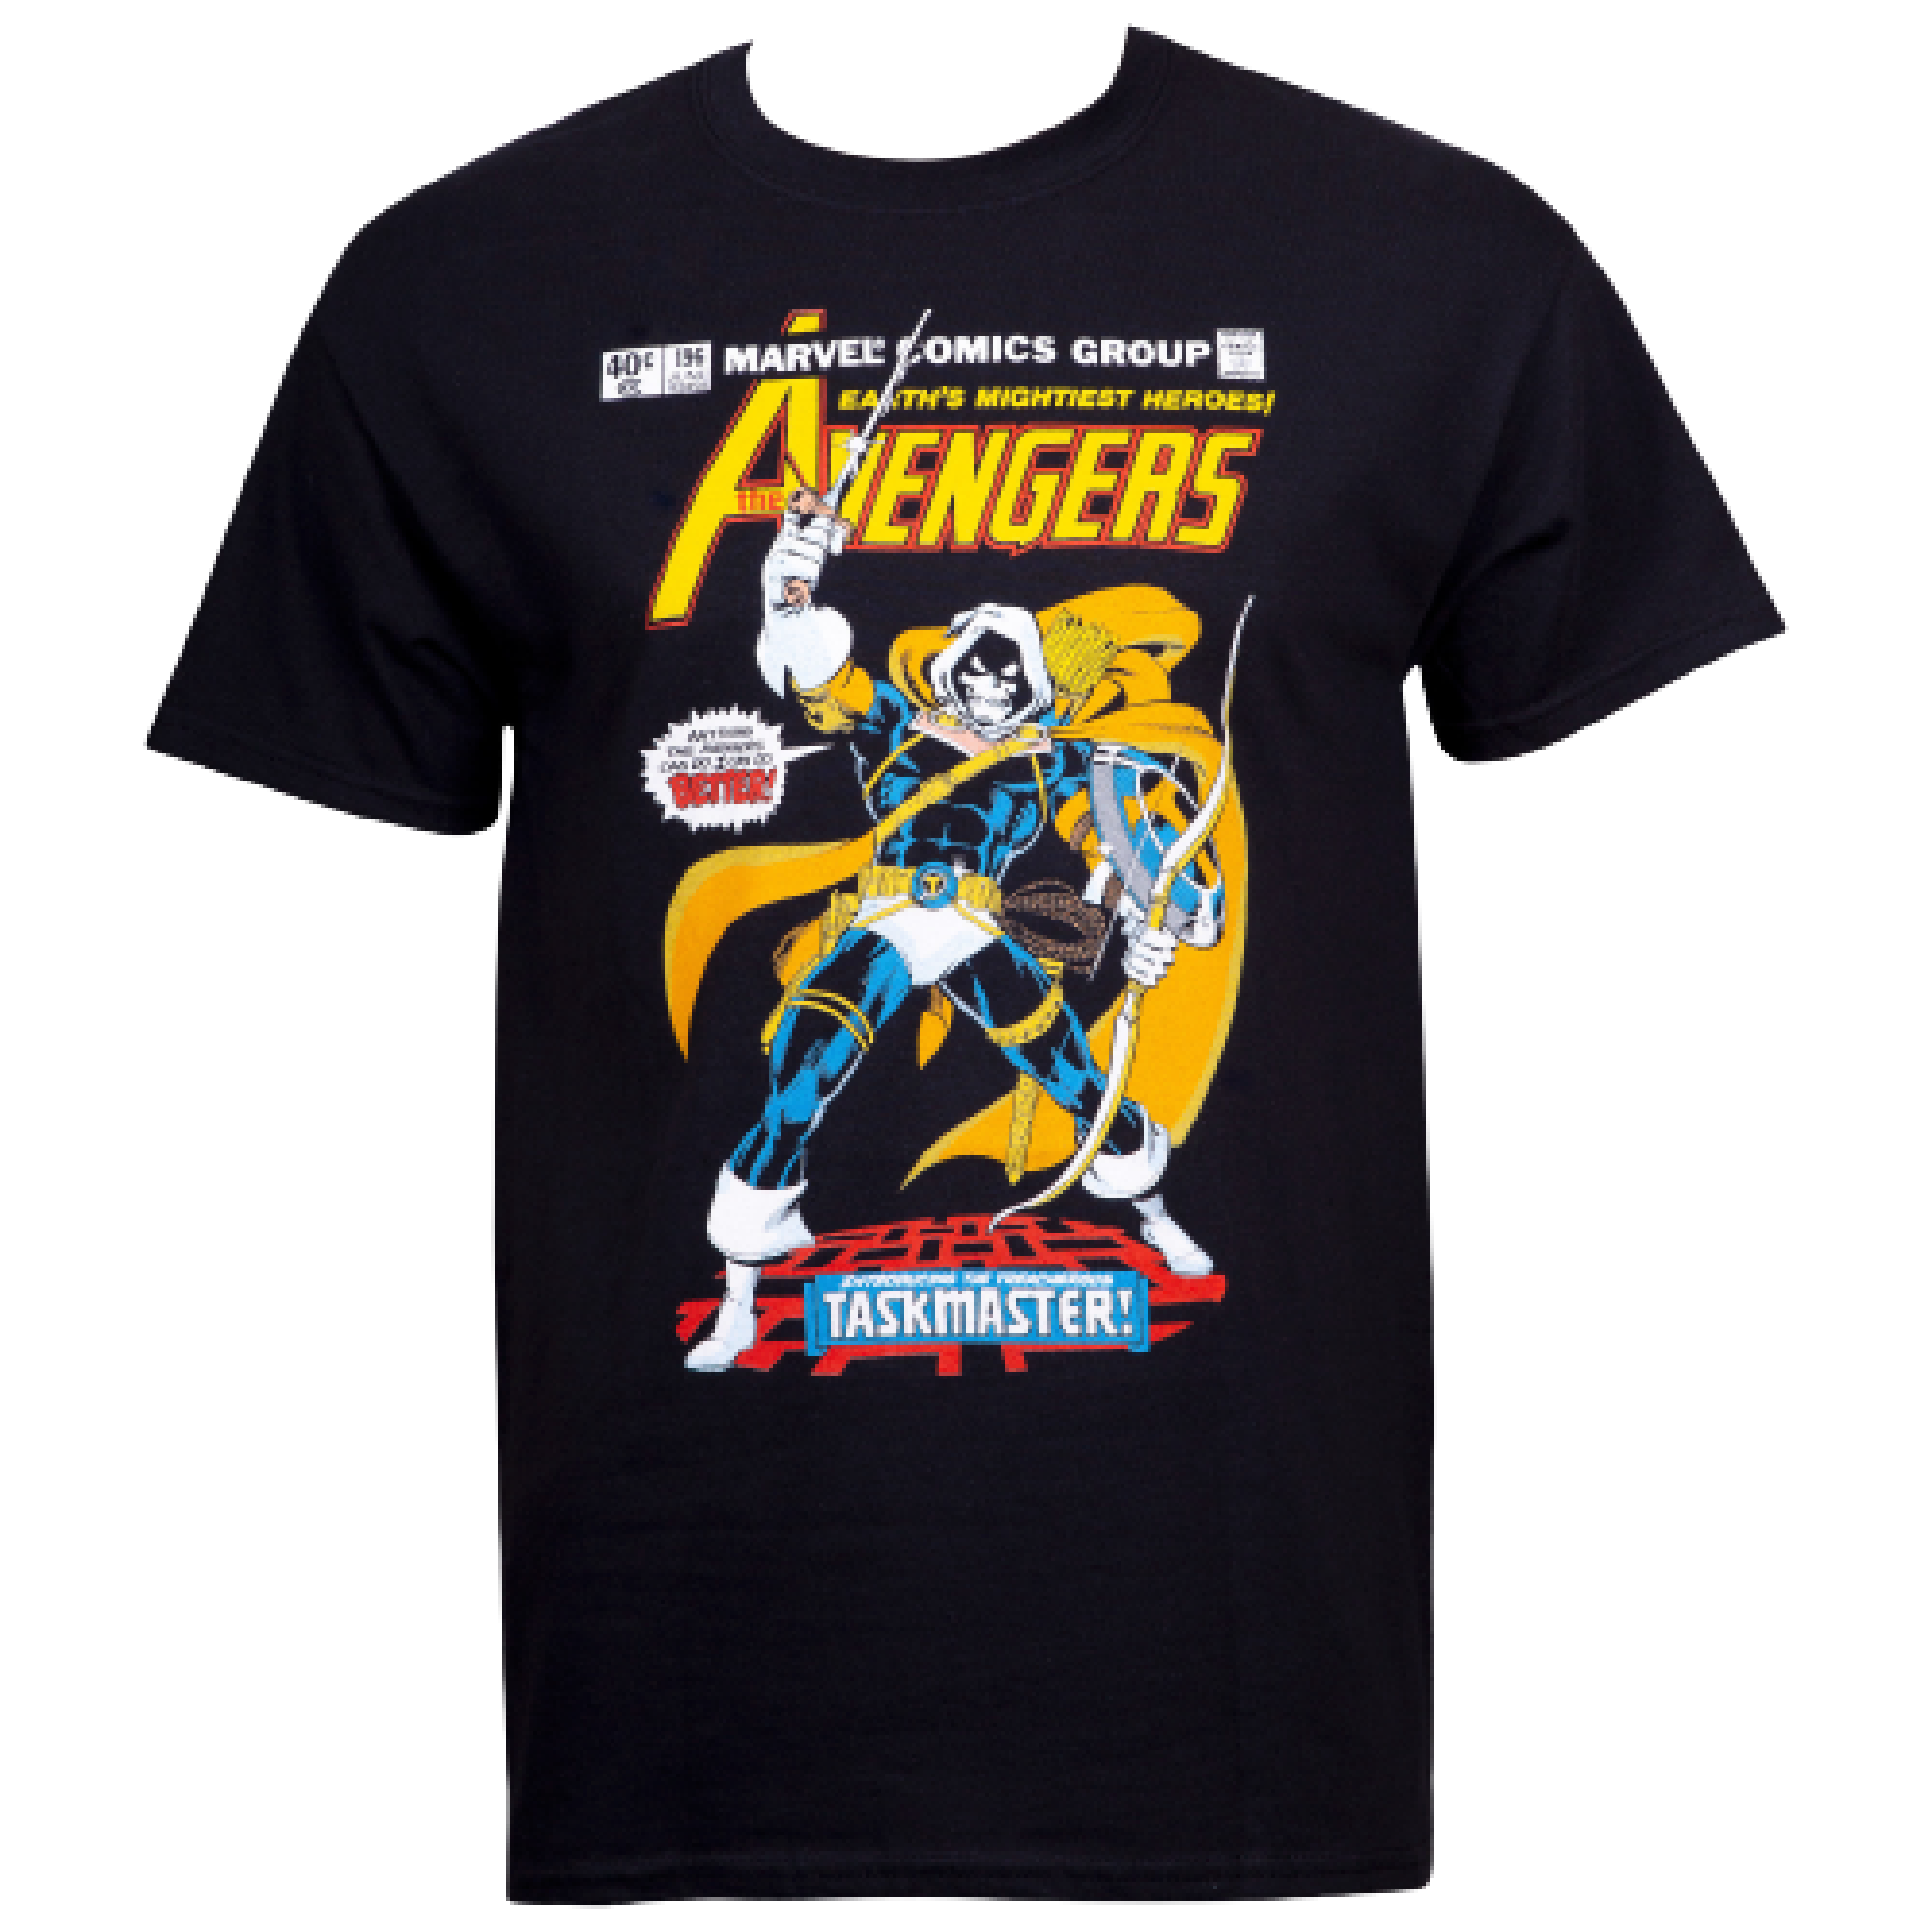 The Taskmaster Avengers Earths Mightiest Heroes Comic Cover T-Shirt Small 